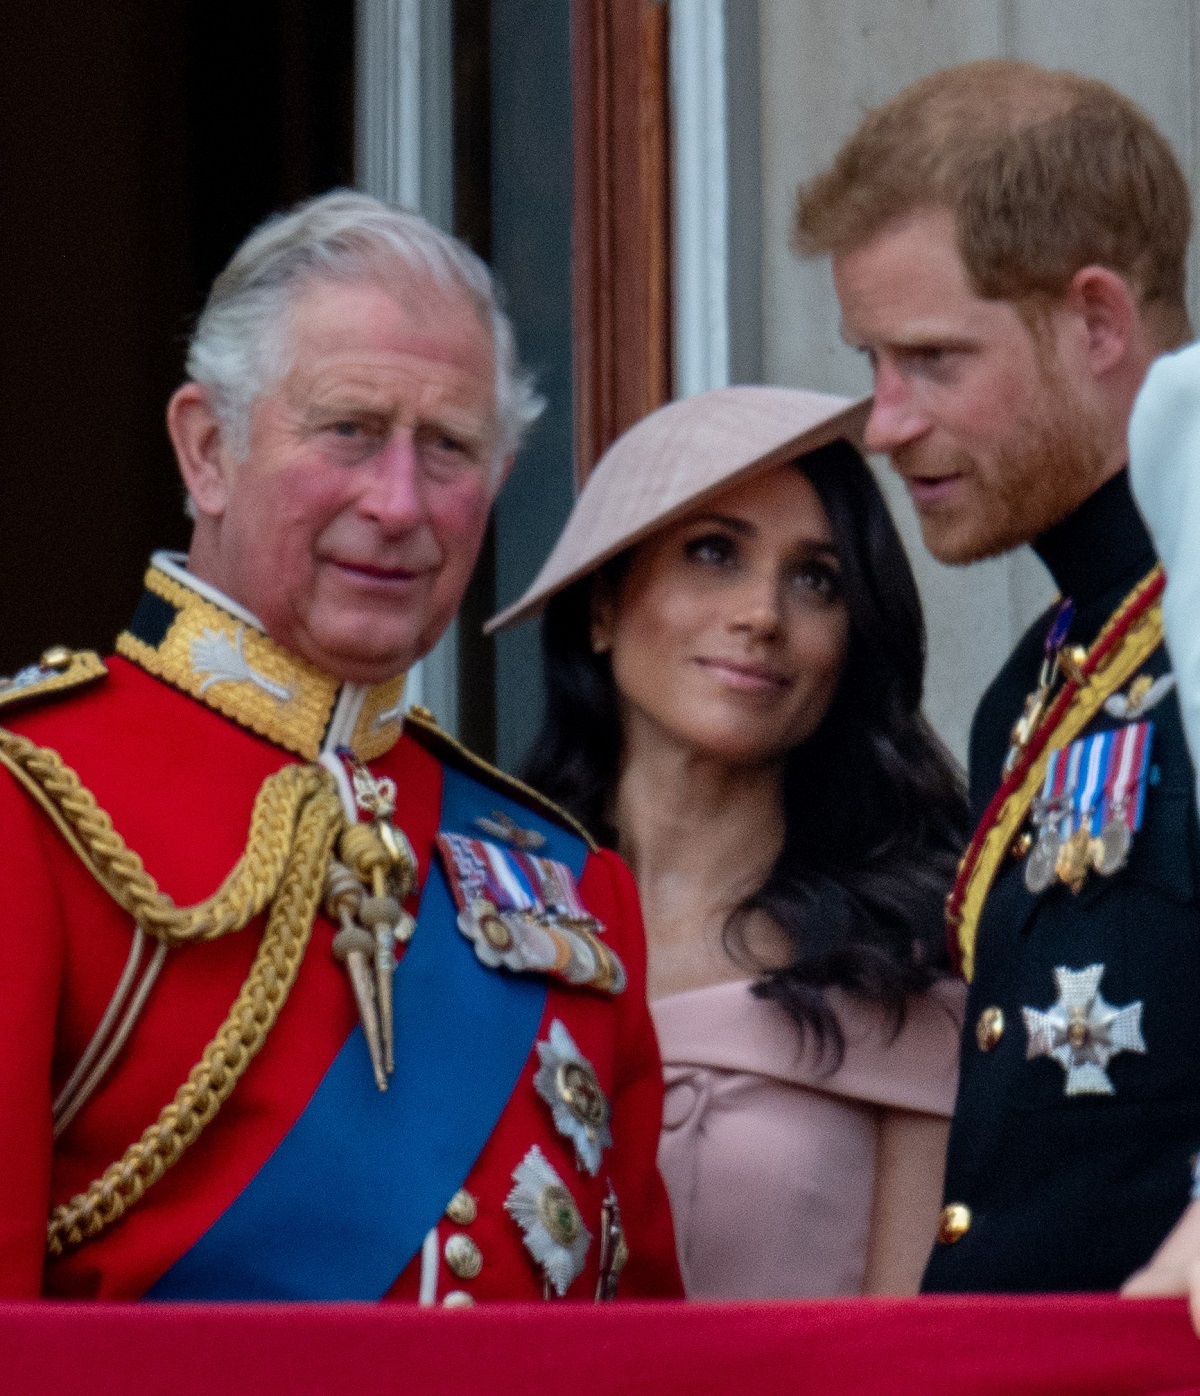 Prince Charles standing on the royal balcony with Meghan Markle and Prince Harry during Trooping the Colour in 2018